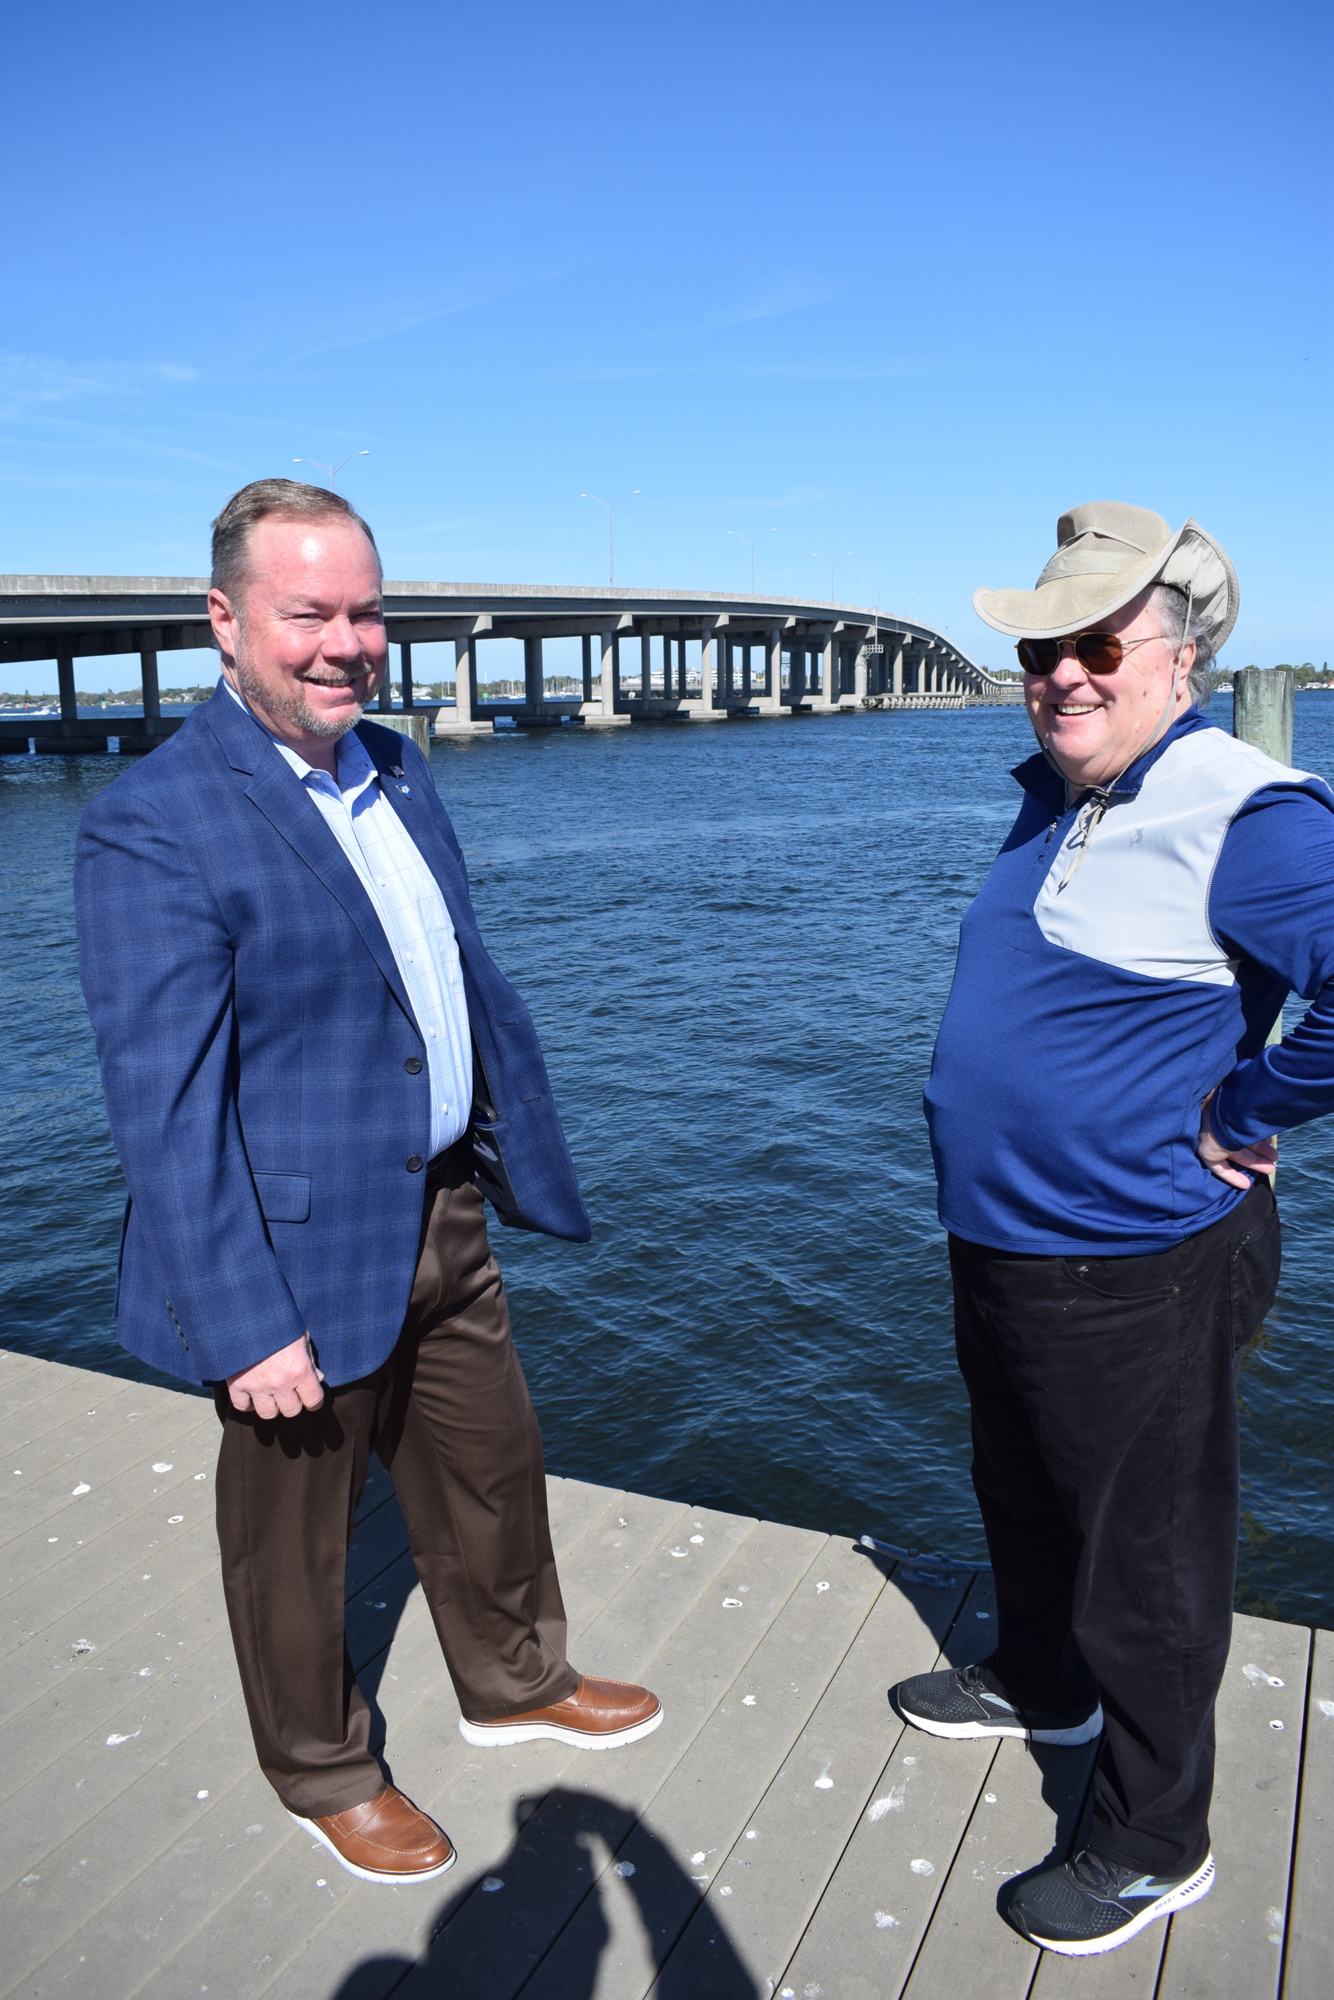 Mayor Gene Brown and Mike Fetchko talk about the Bradenton Area River Regatta with the Green Bridge in the background.